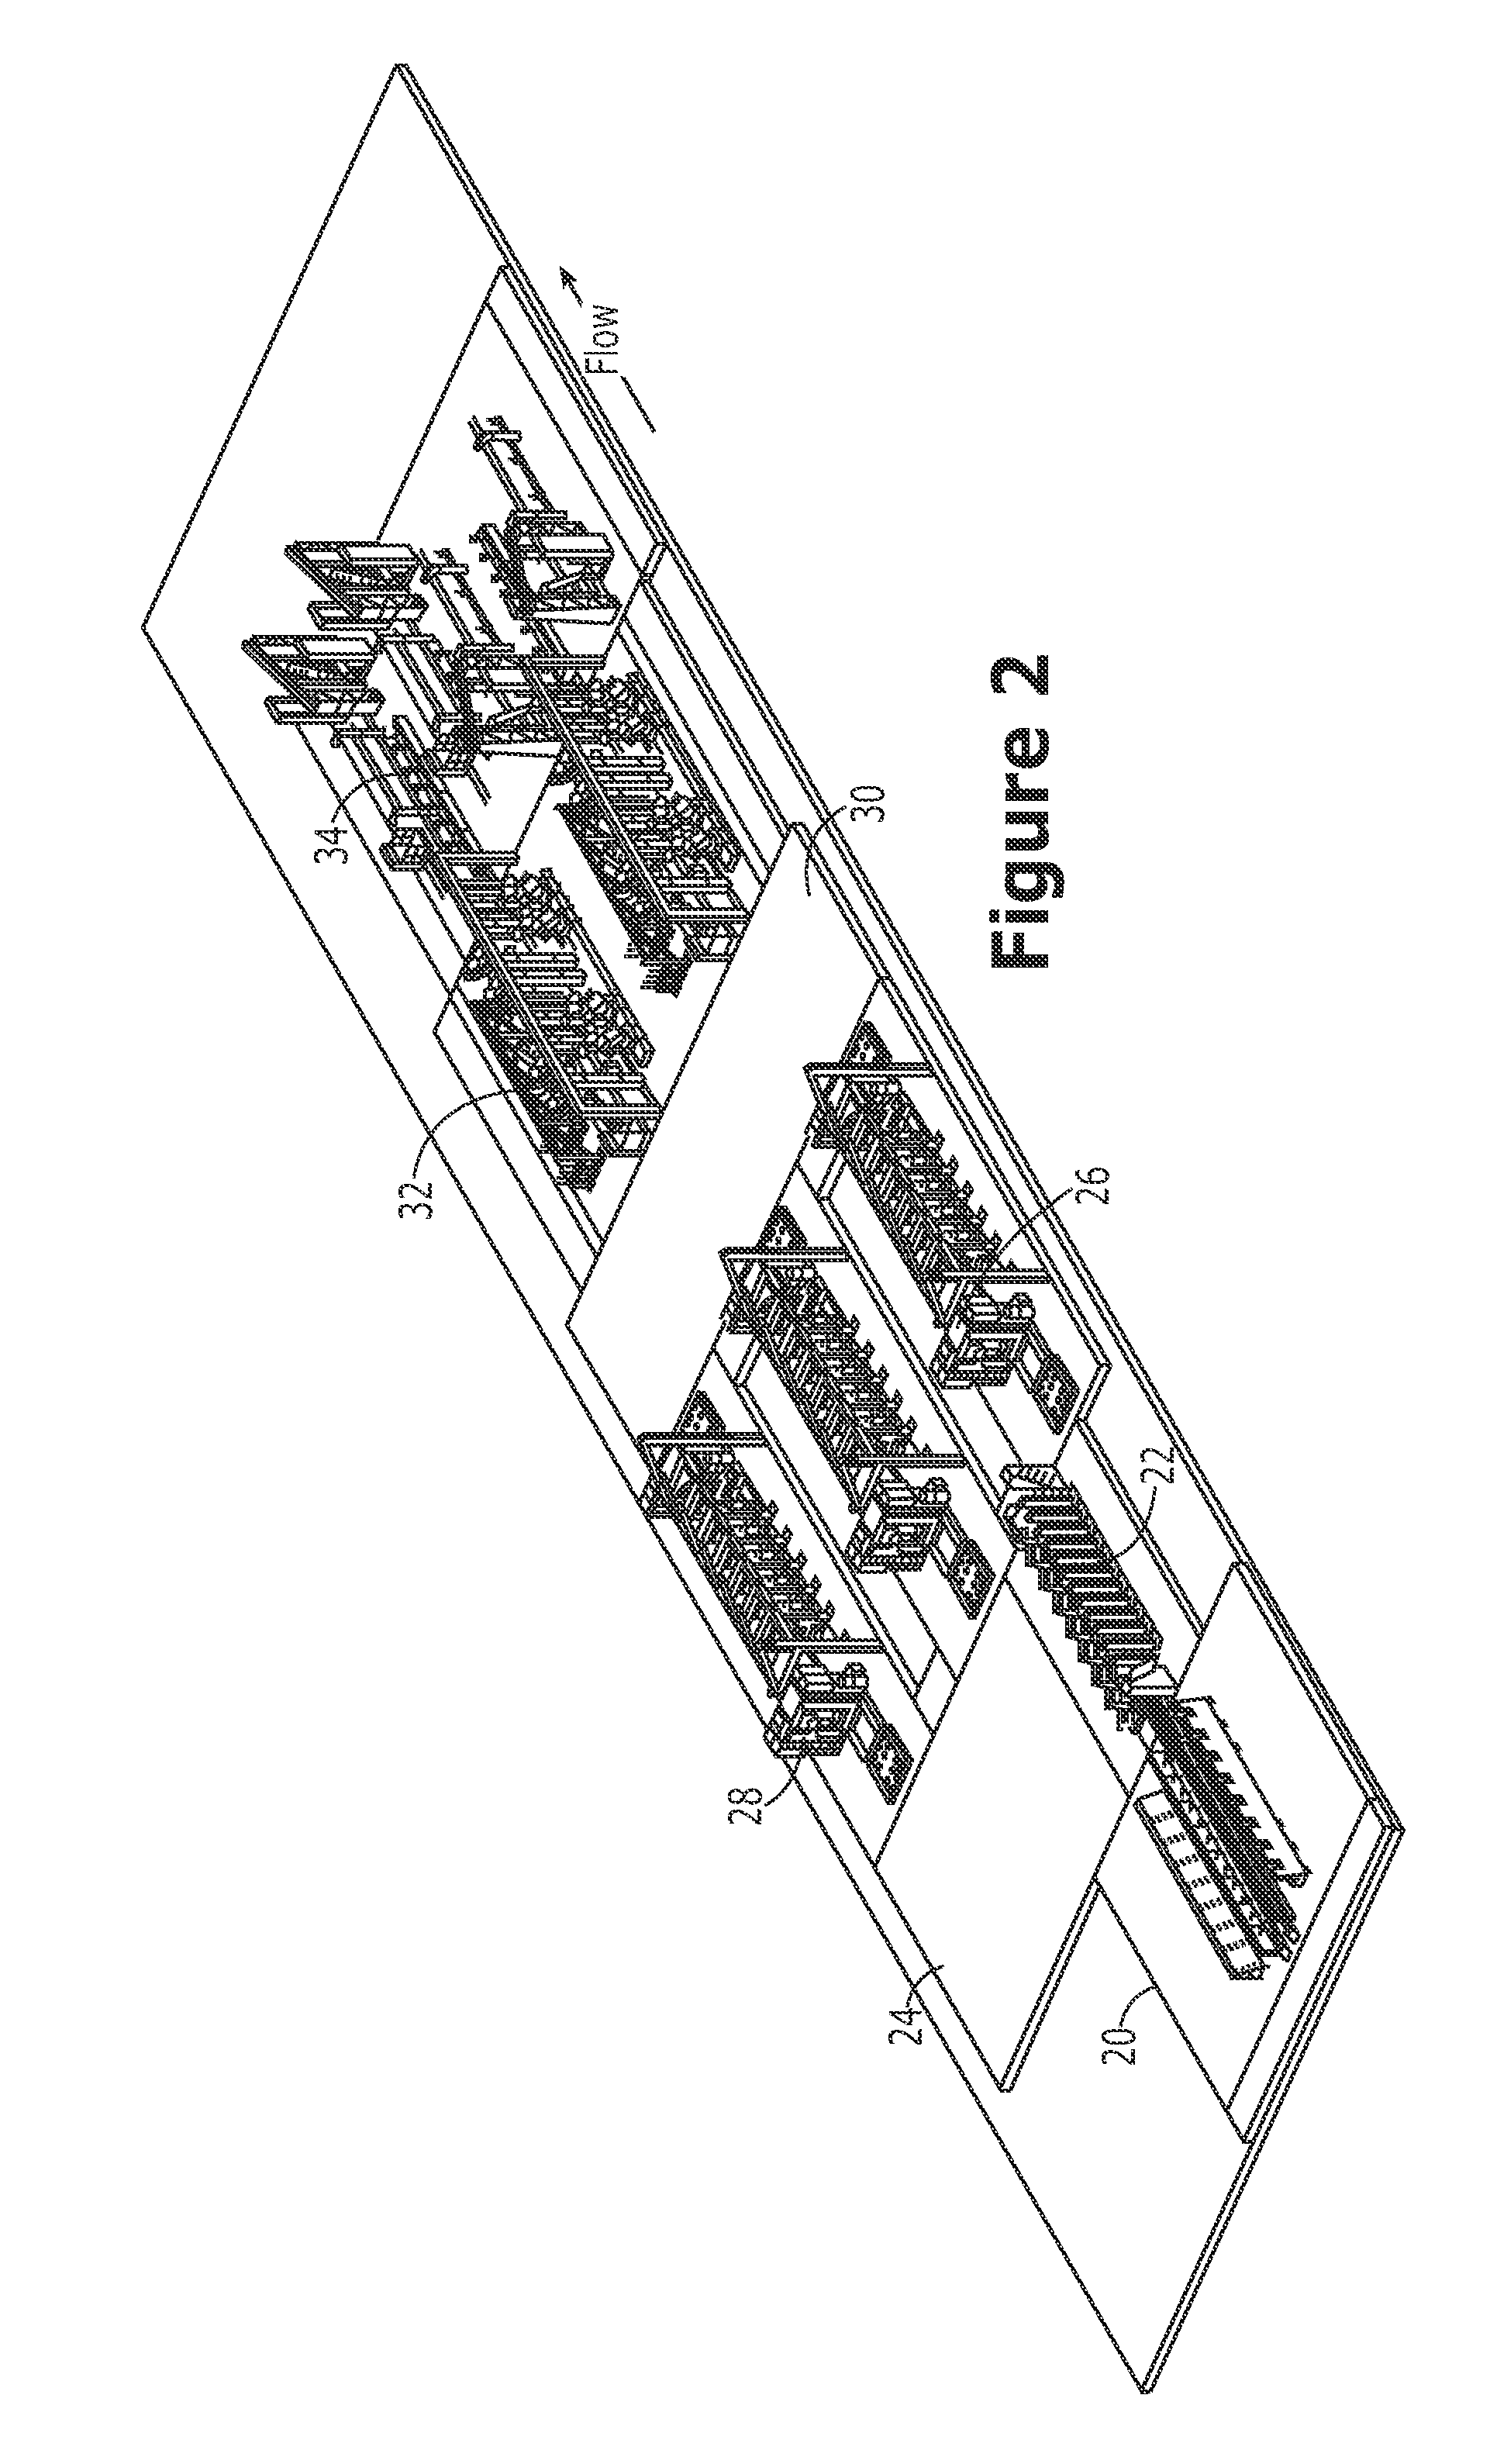 System and method for manufacturing a wing panel